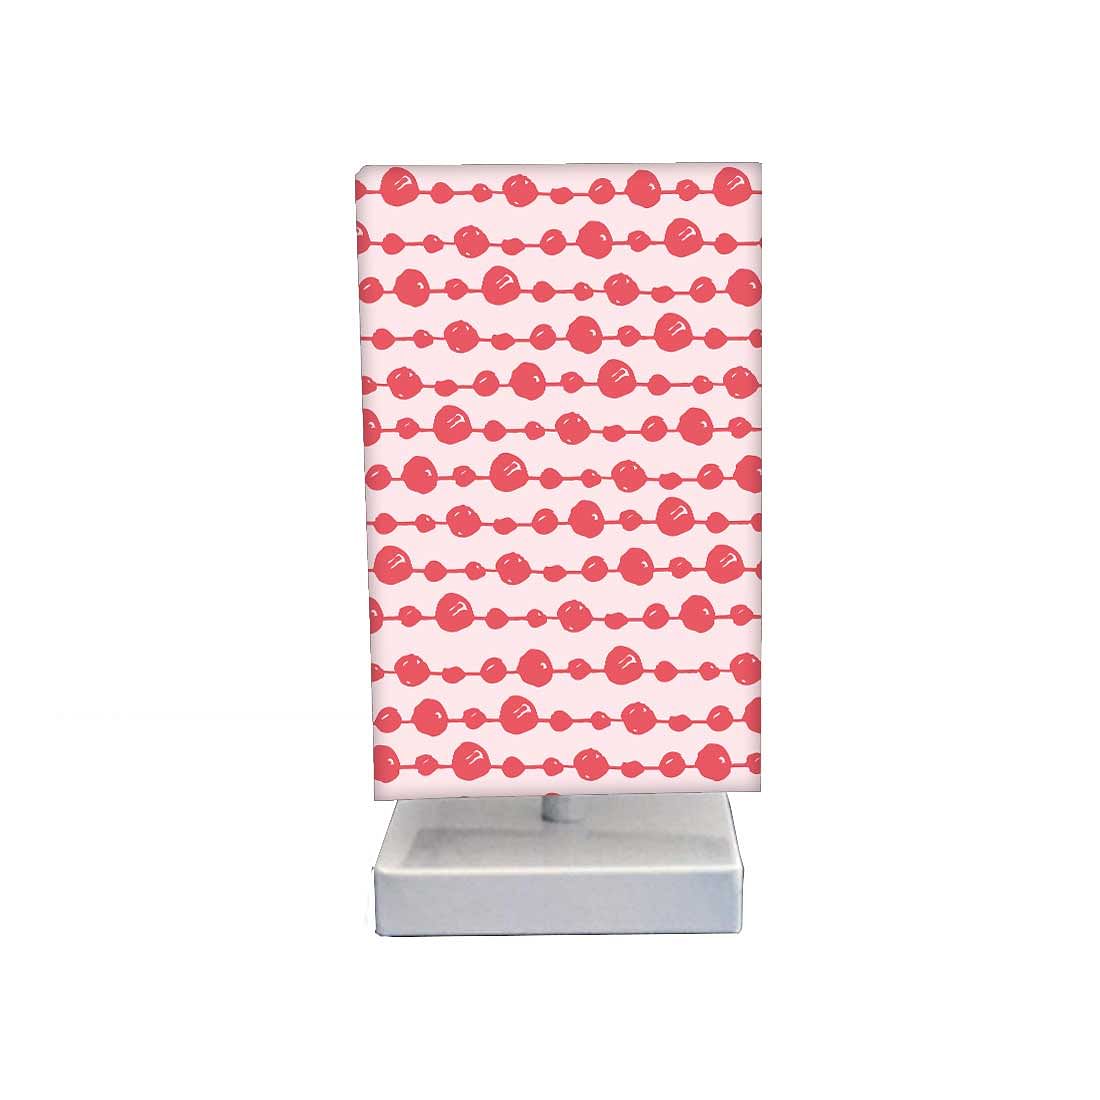 Bedside Table Lamps For Bedroom-Pink White Dots Nutcase